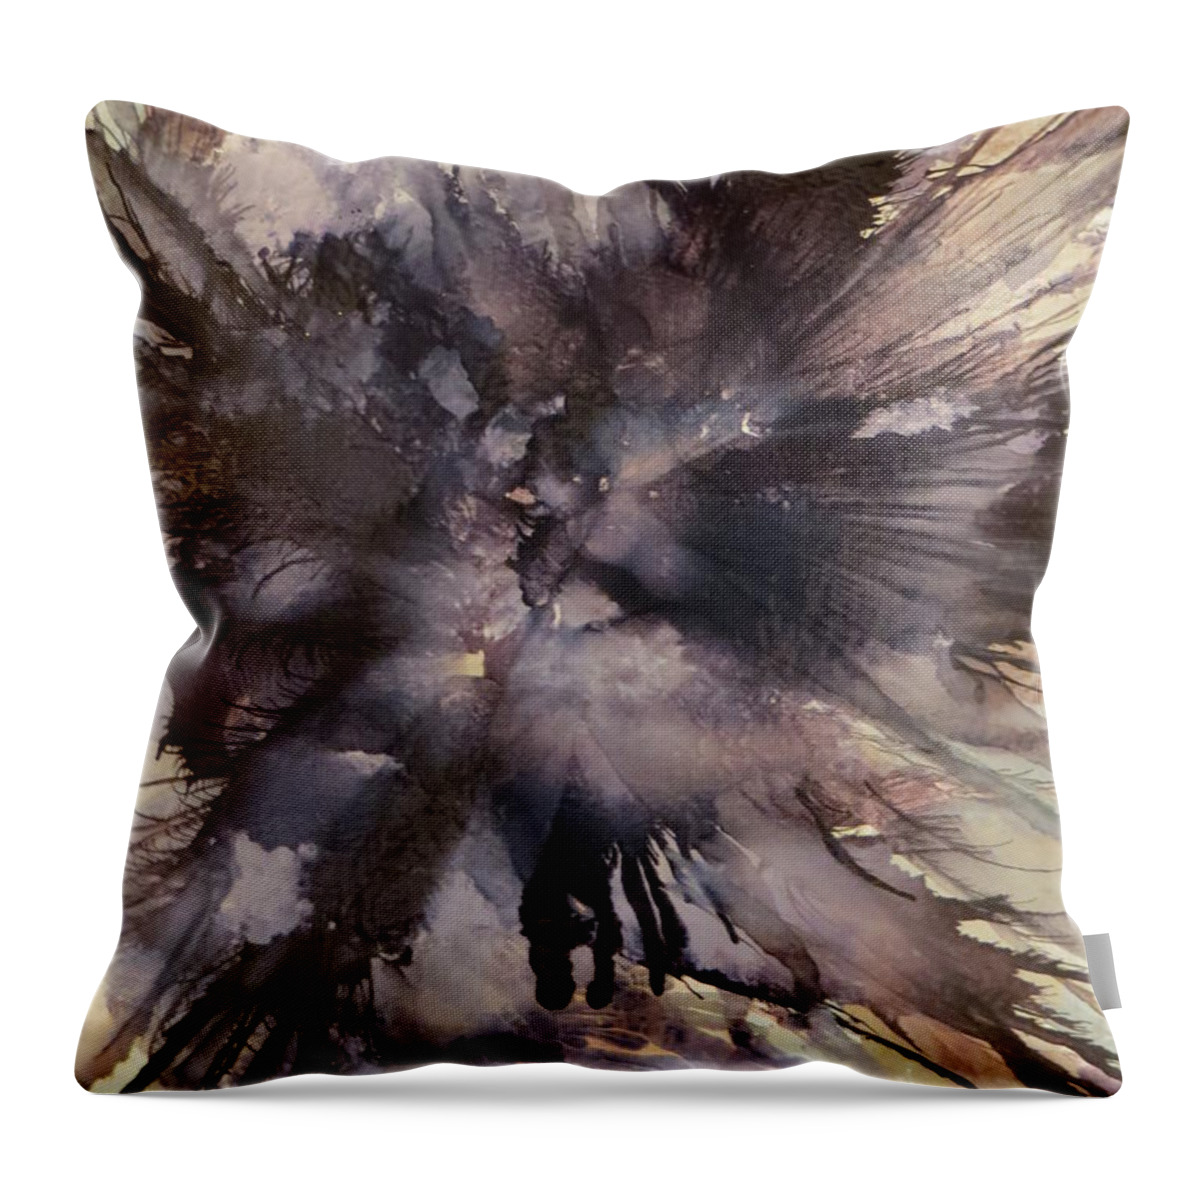 Abstract Throw Pillow featuring the painting Capable by Soraya Silvestri